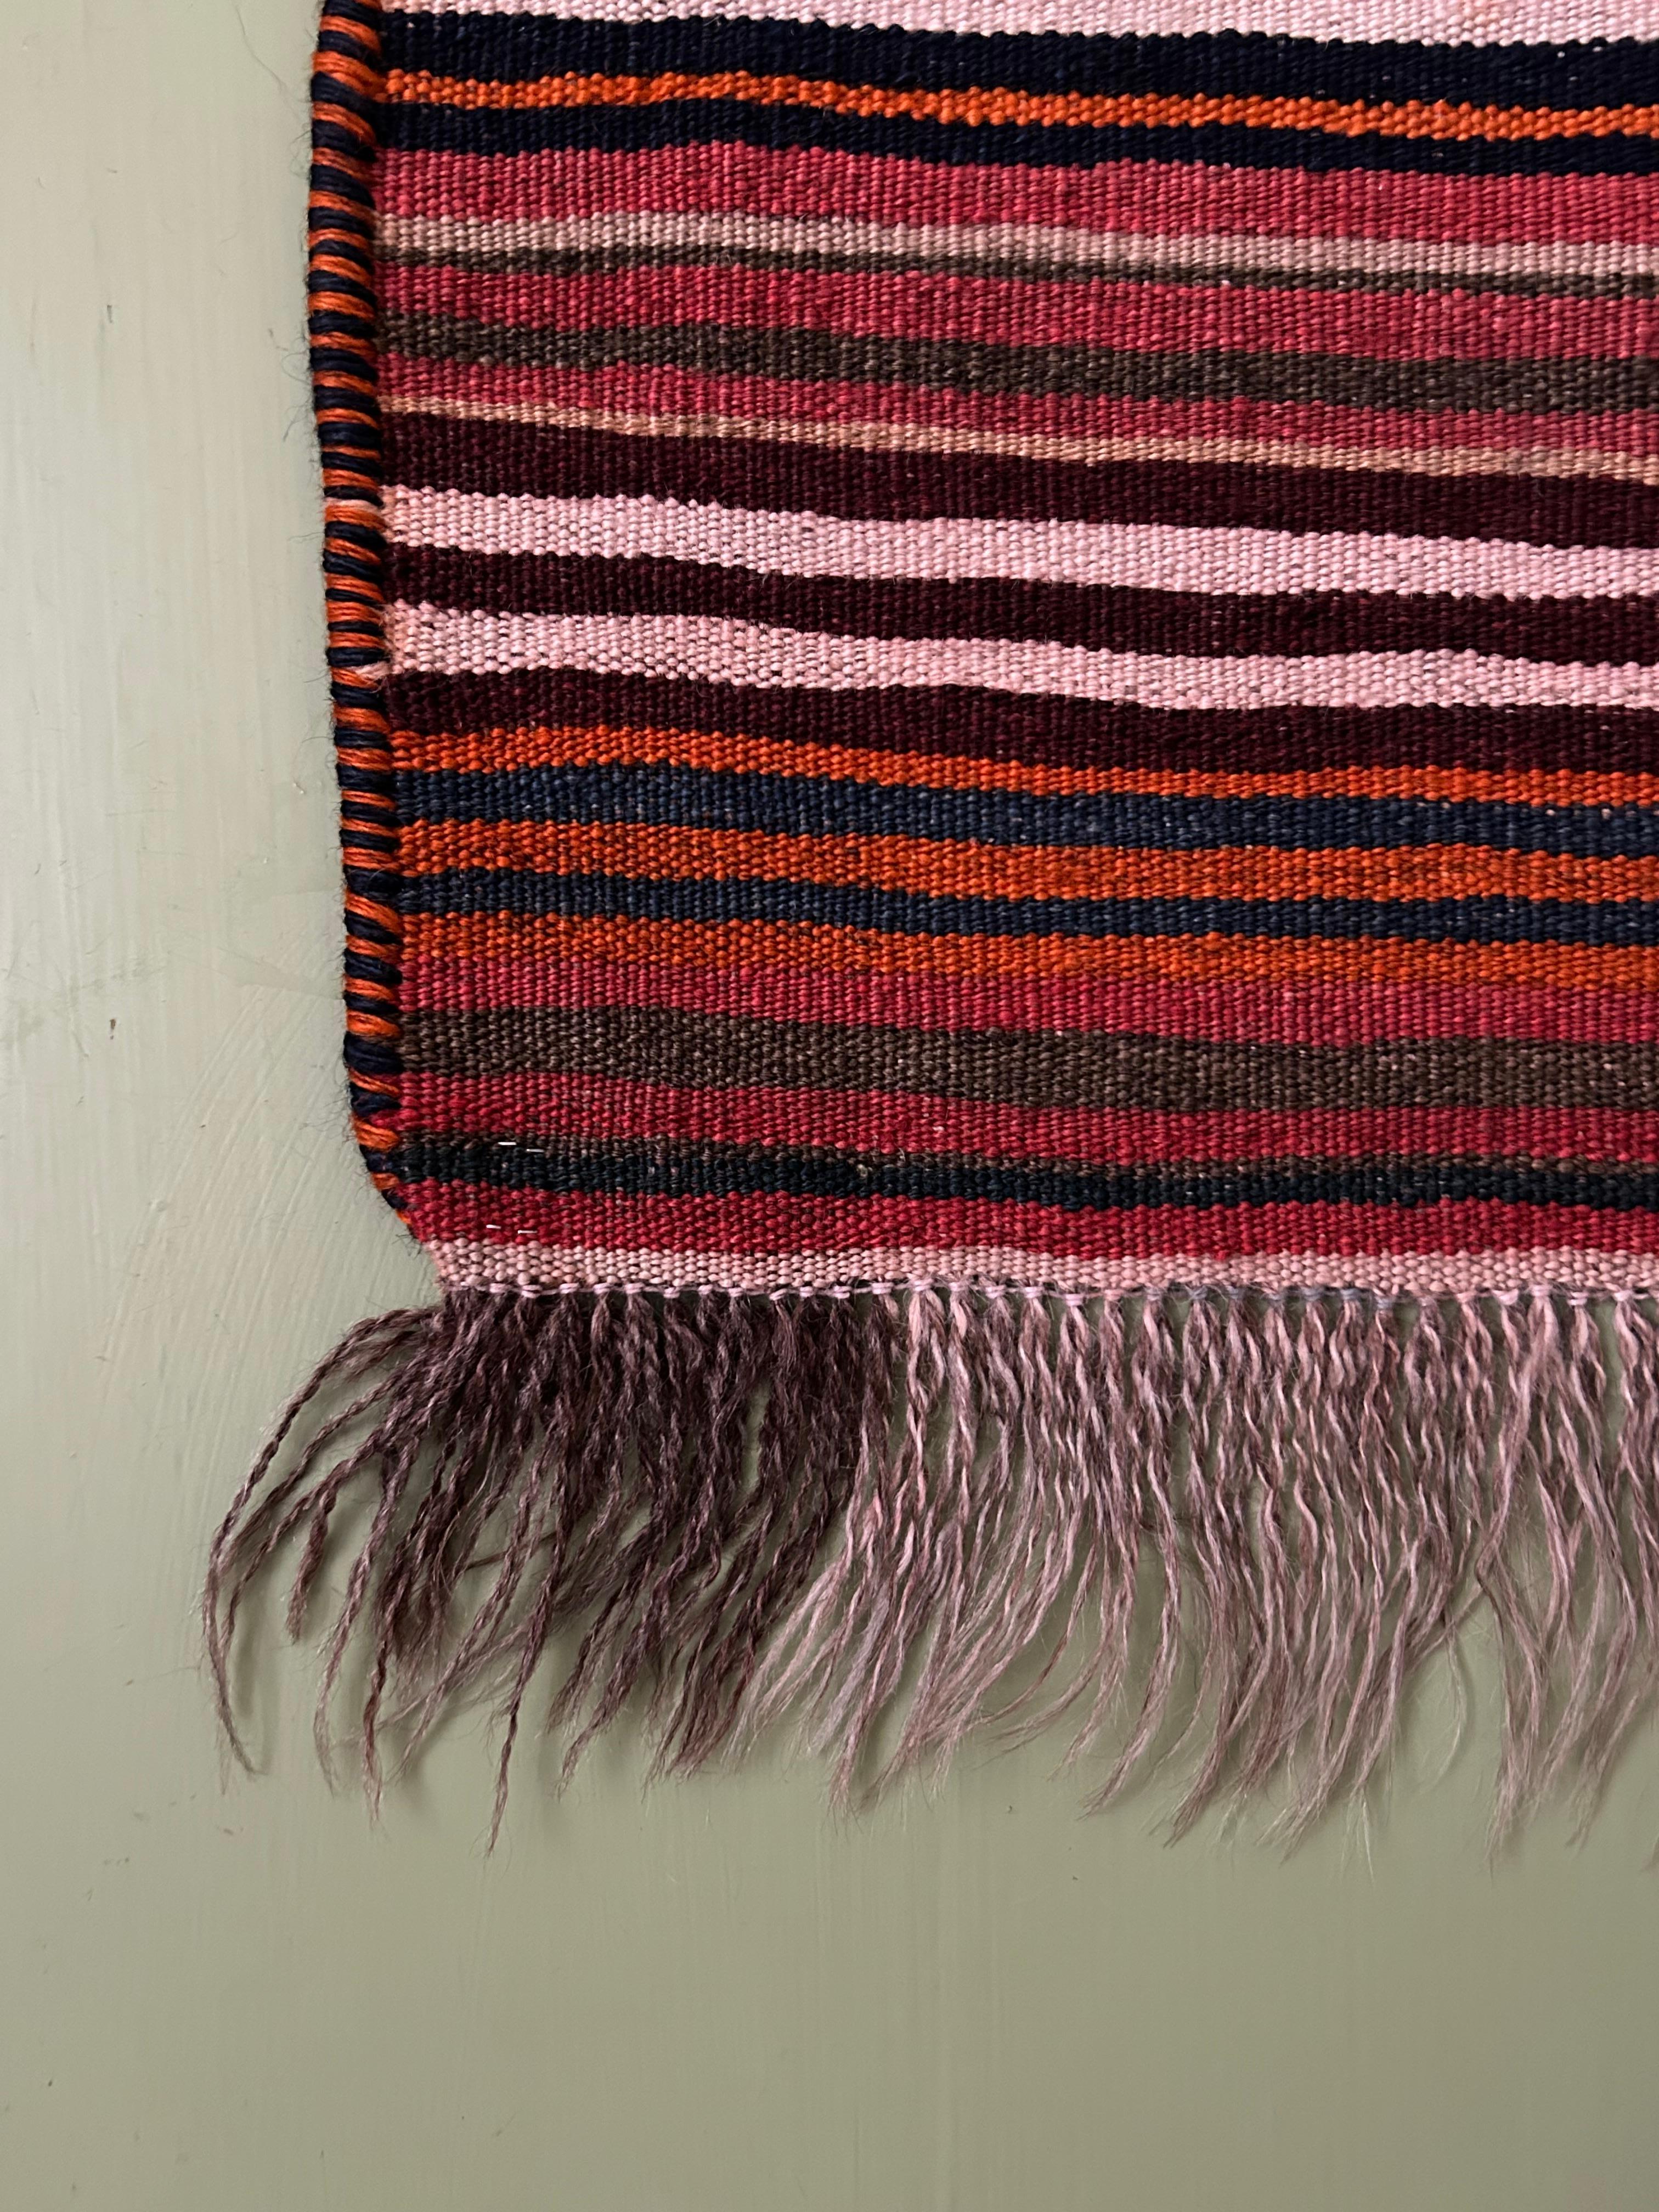 Hand-Crafted Vintage Kashgai Rug with Stripes in Red and Earthtones, West Asia, 20th Century